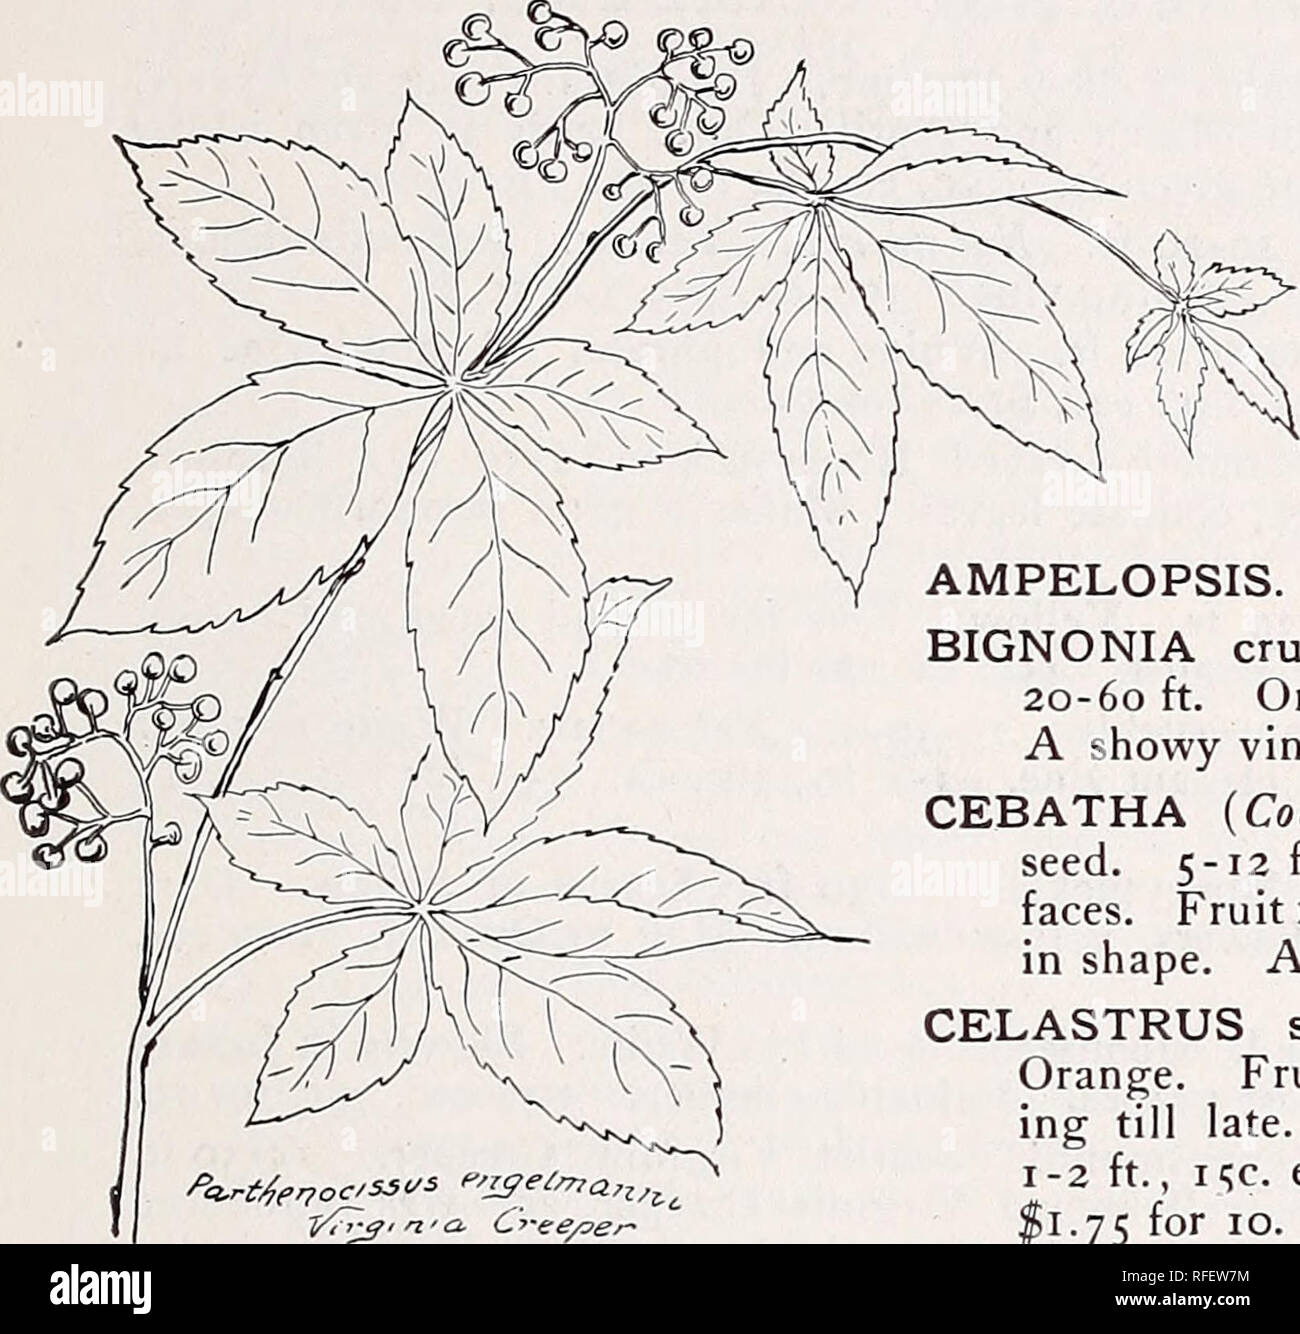 . Kelsey's hardy American plants and Carolina mountain flowers. Nursery stock Massachusetts Boston Catalogs; Trees Seedlings Catalogs; Shrubs Catalogs; Plants, Ornamental Catalogs; Flowers Catalogs. Katoana, North Carolina, and 'Boston, Massachusetts. Scarlet, bell-shaped flowers, crispa. Purple Clematis. 4- May till August. 25c. ea., scottii (douglasii). Western One of the finest spring sorts, conspicuous. 25c. ea., $2.25 for 10. ligusticifolia. Western Virgin's Bower. 5-15 ft.. White. Fine sort, much like C. njirgini- ana. 30c. ea., $2.50for 10. (See illustration.) virginiana. Virgin's Bower Stock Photo